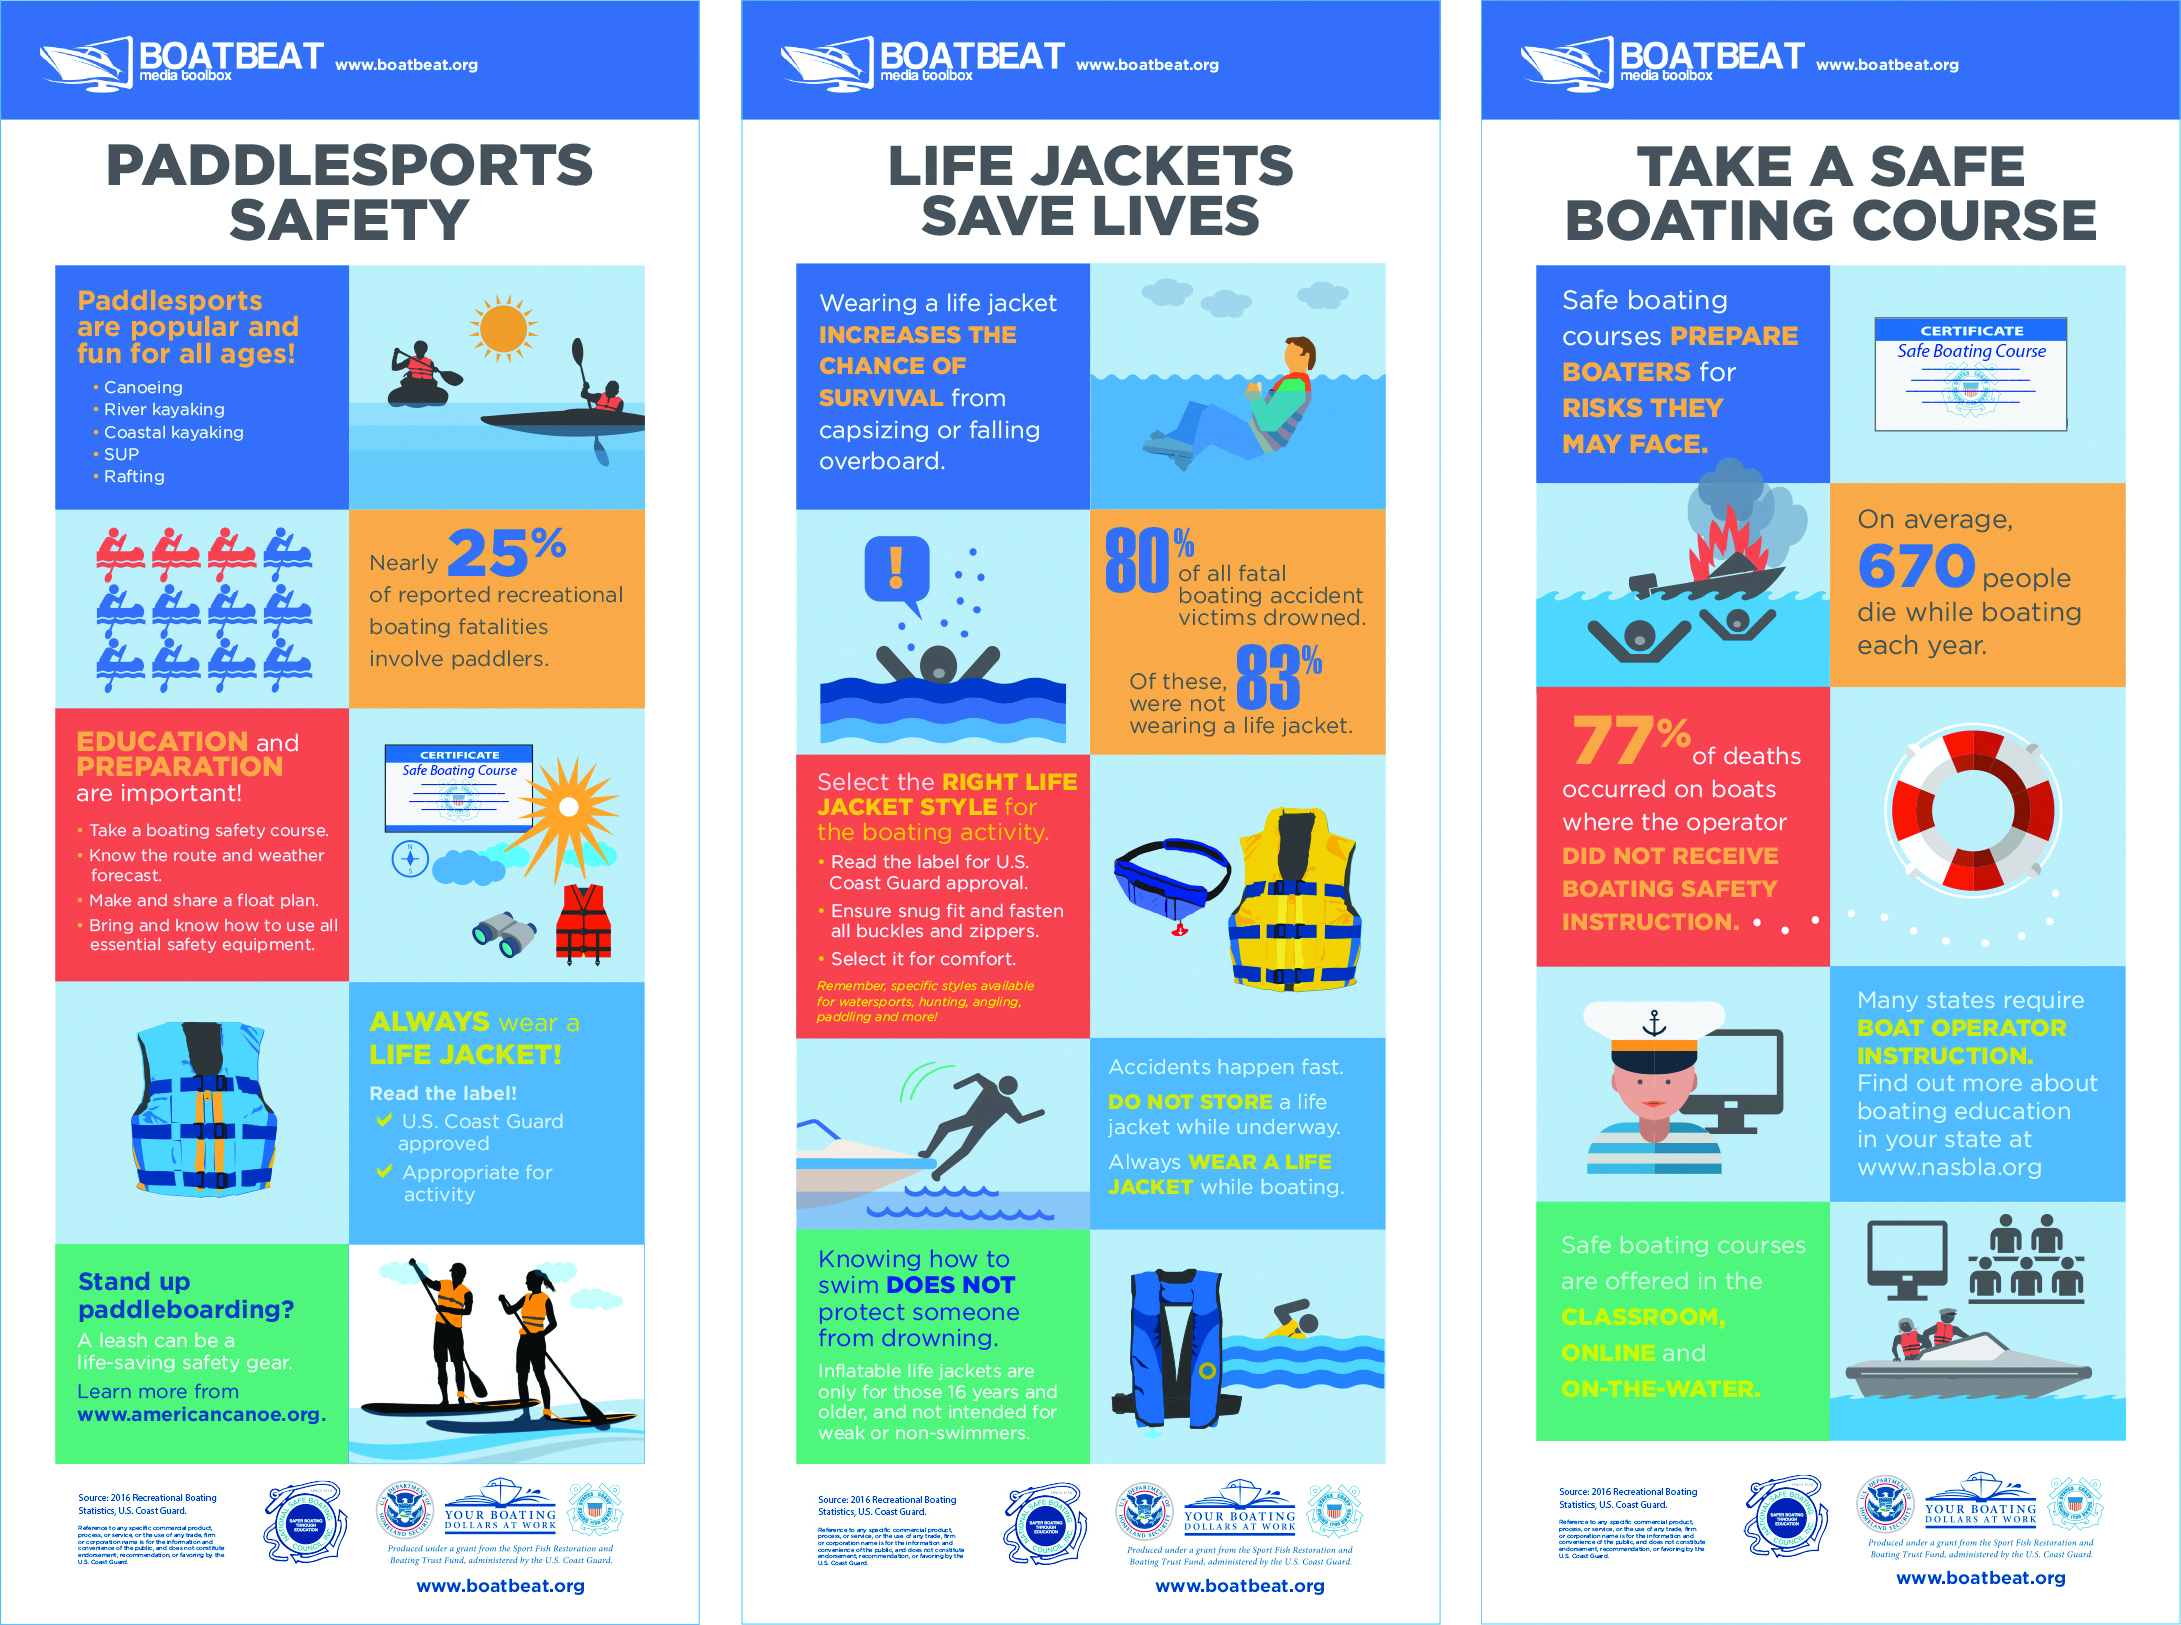 Boating Safety Resources Available Through BoatBeat – Lakeland Boating